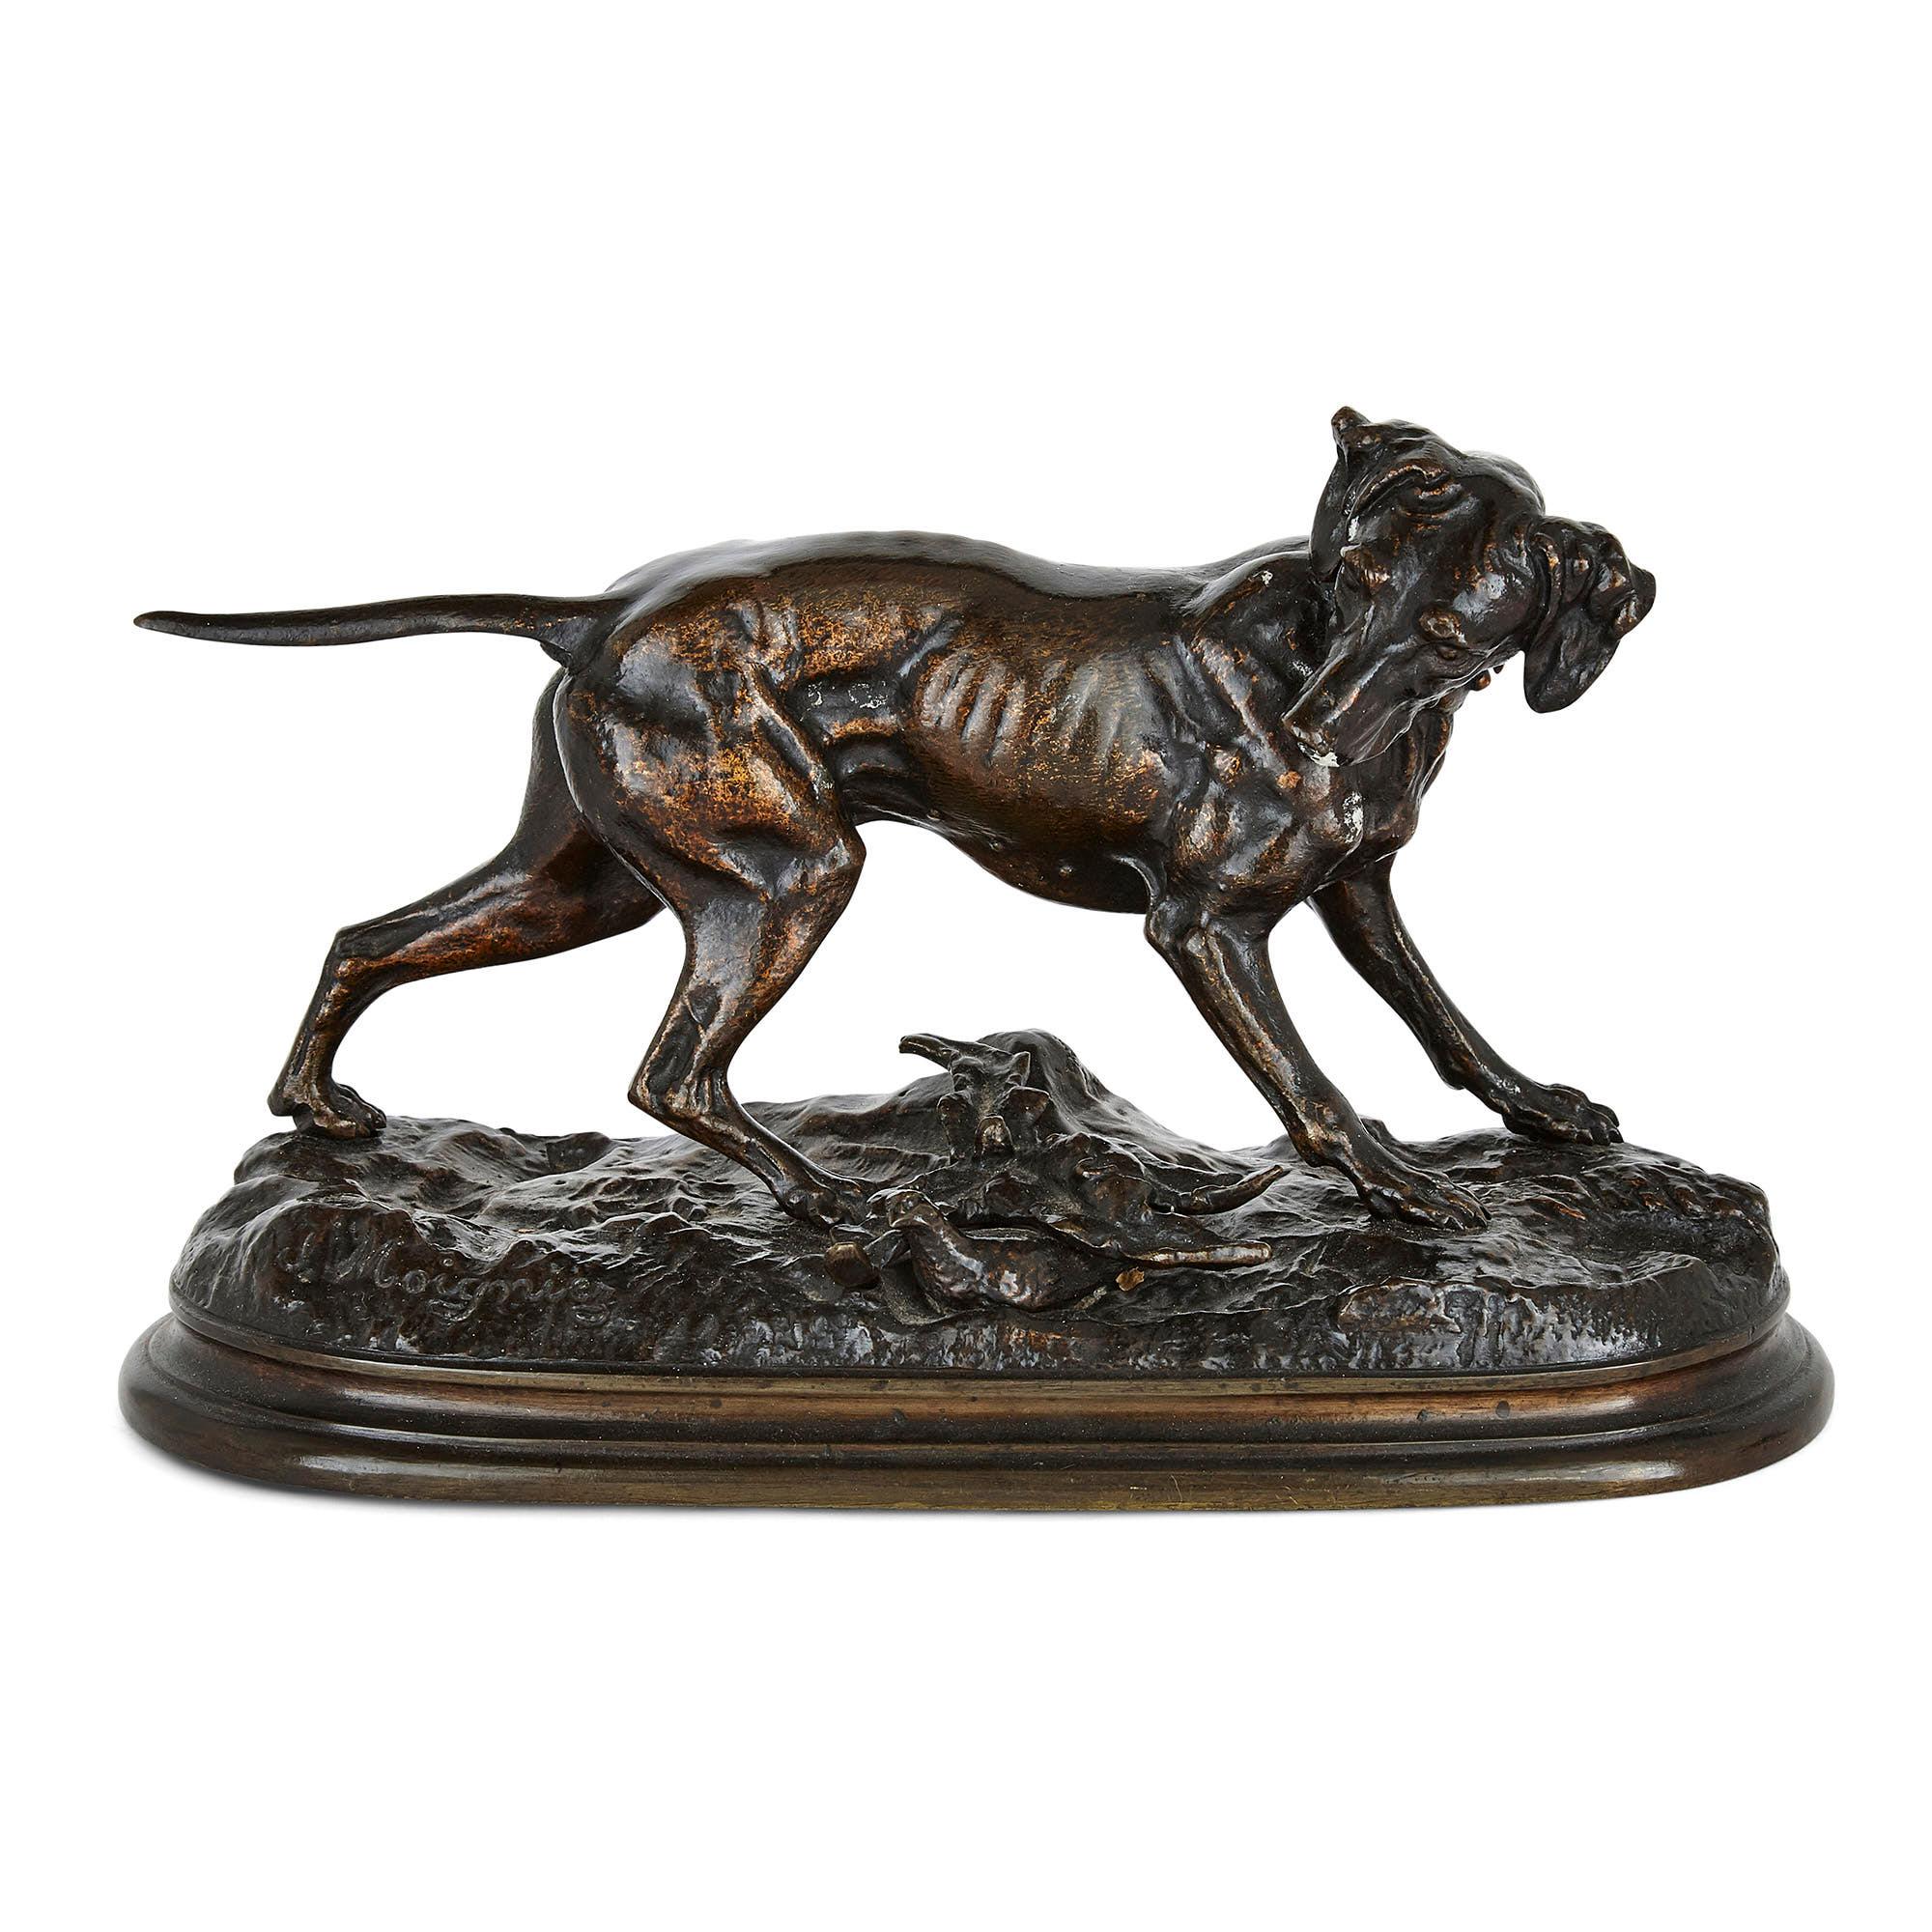 Pair of animalier bronze dog sculptures by Jules Moigniez
French, late 19th Century
Measures:Height 13cm, width 22cm, depth 10cm

This charming pair of dog sculptures is by the French animalier sculptor Jules Moigniez, who has been celebrated